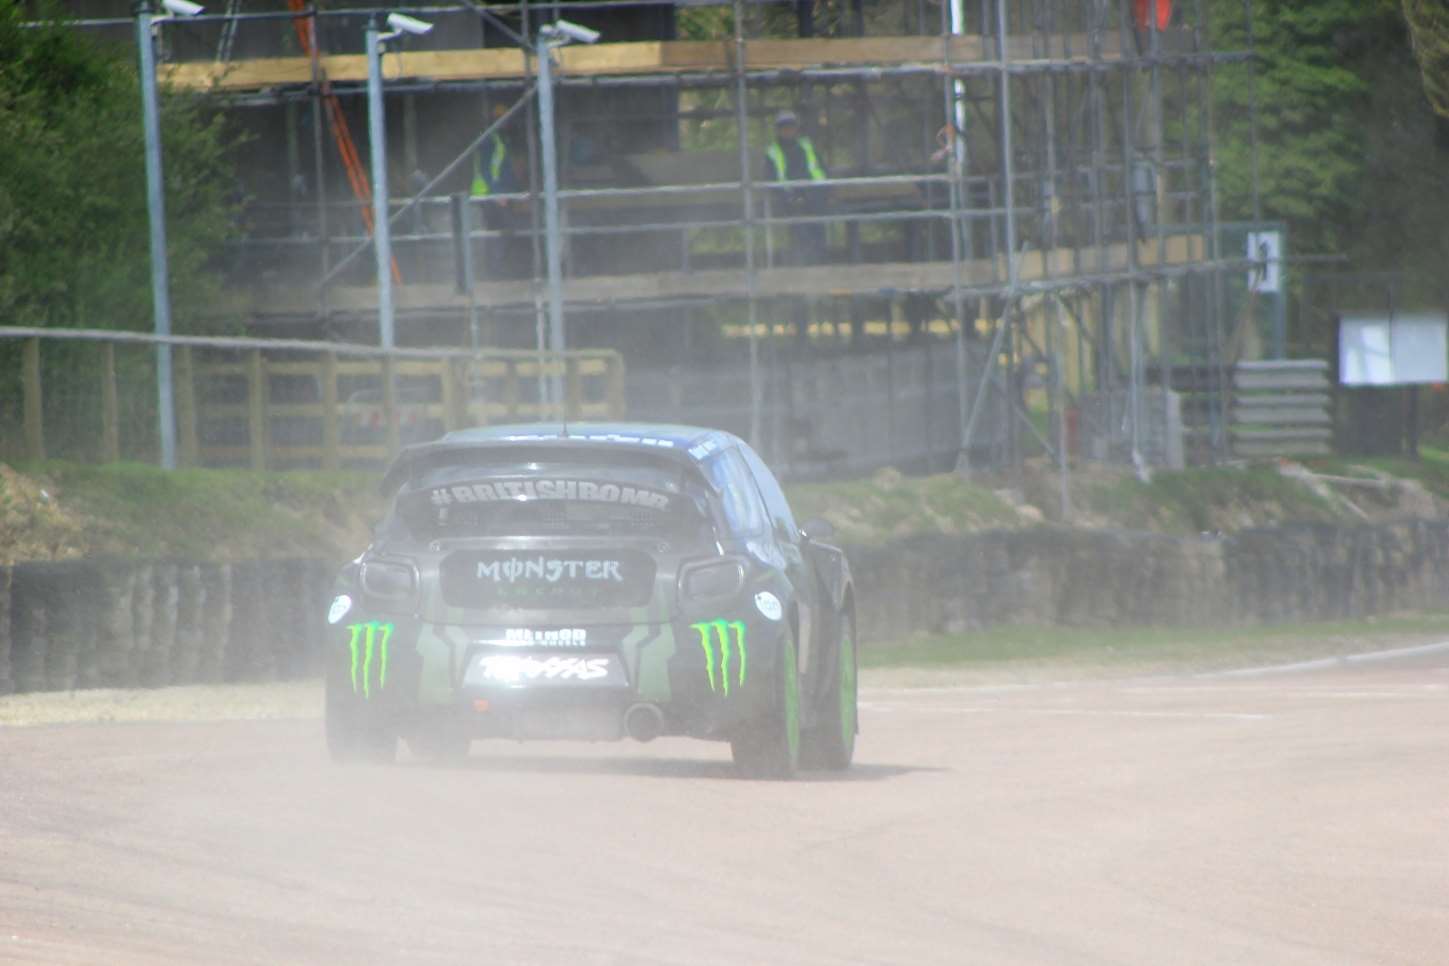 Doran tested at Lydden Hill recently - here he is passing the in-build control tower. Picture - Joe Wright.